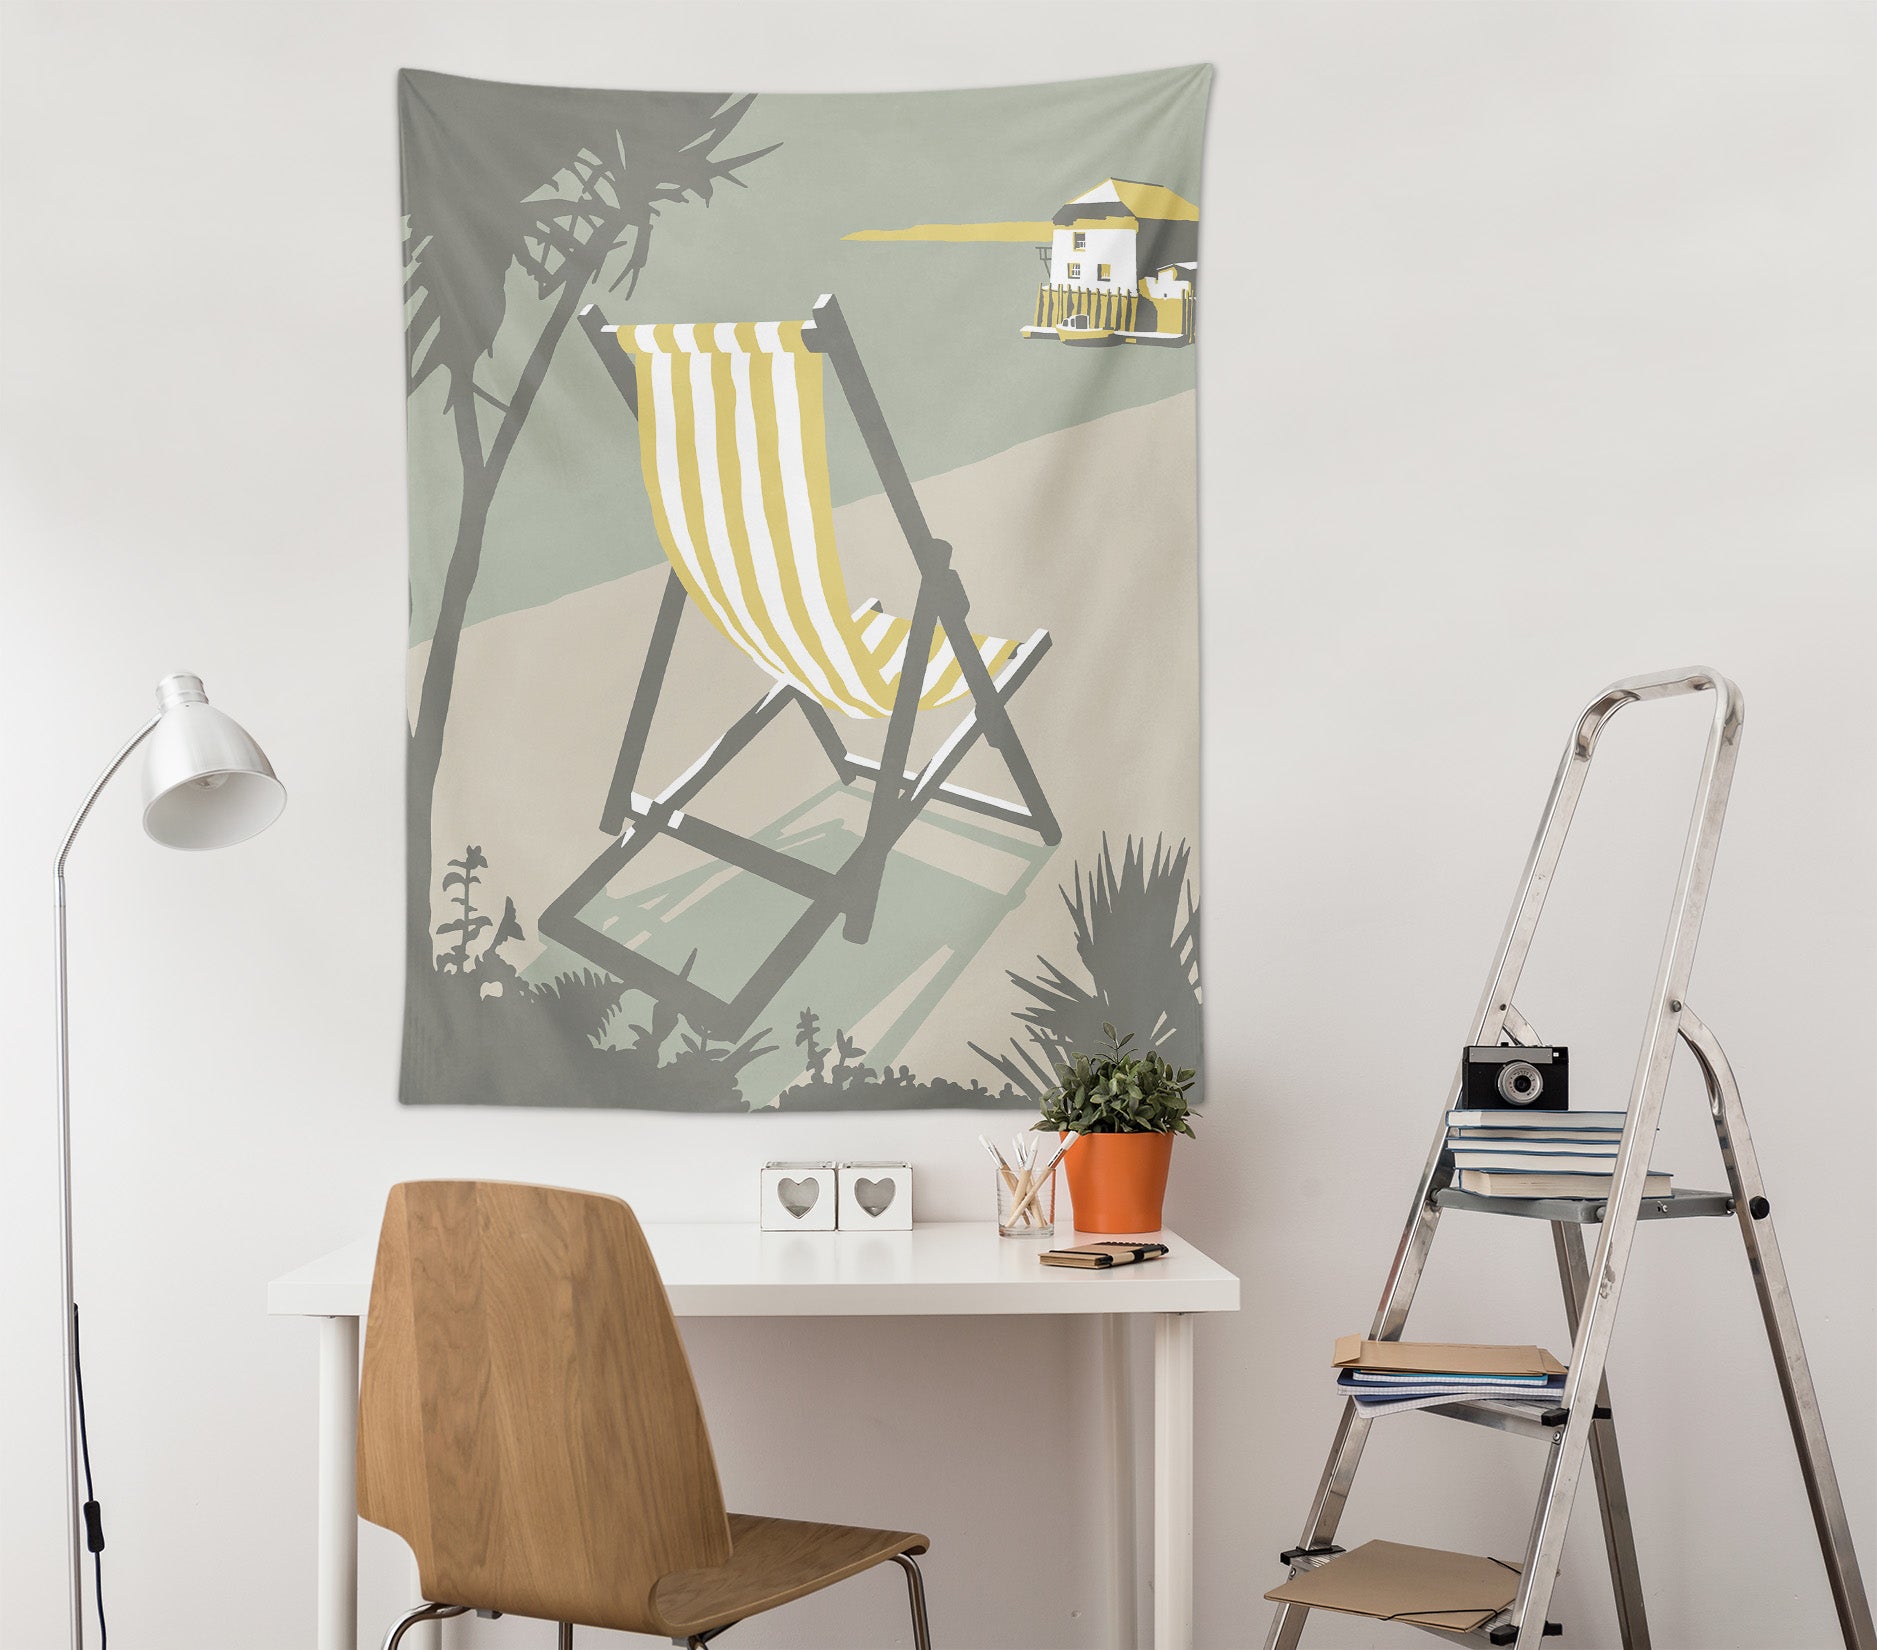 3D Beach Chair 5367 Steve Read Tapestry Hanging Cloth Hang